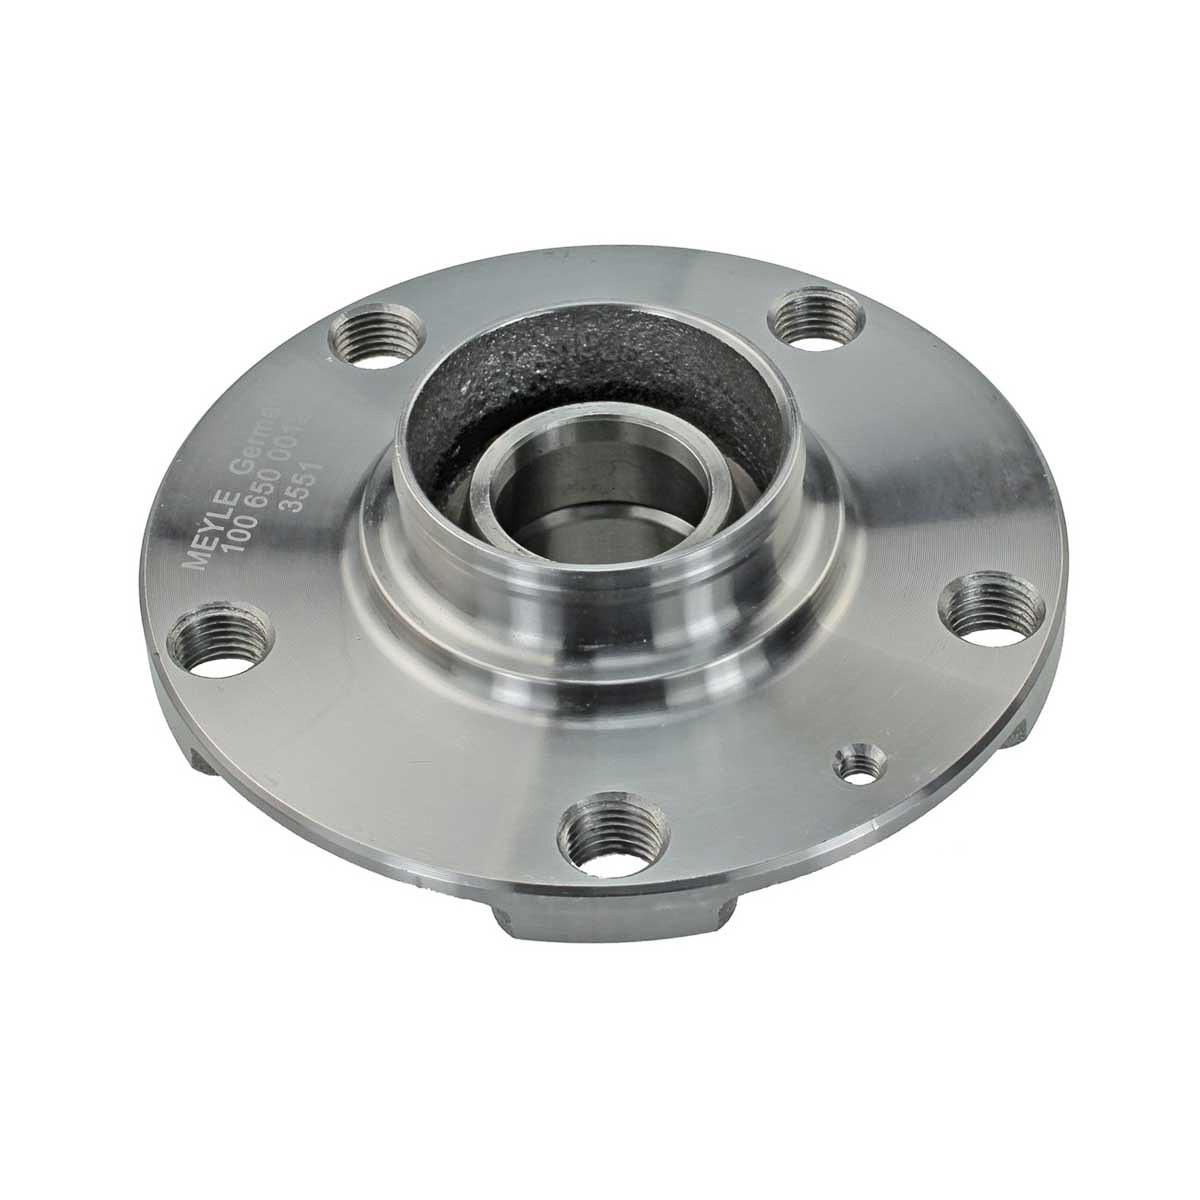 MWH0030 MEYLE 5x112, without wheel bearing, without attachment material, ORIGINAL Quality Wheel Hub 100 650 0012 buy